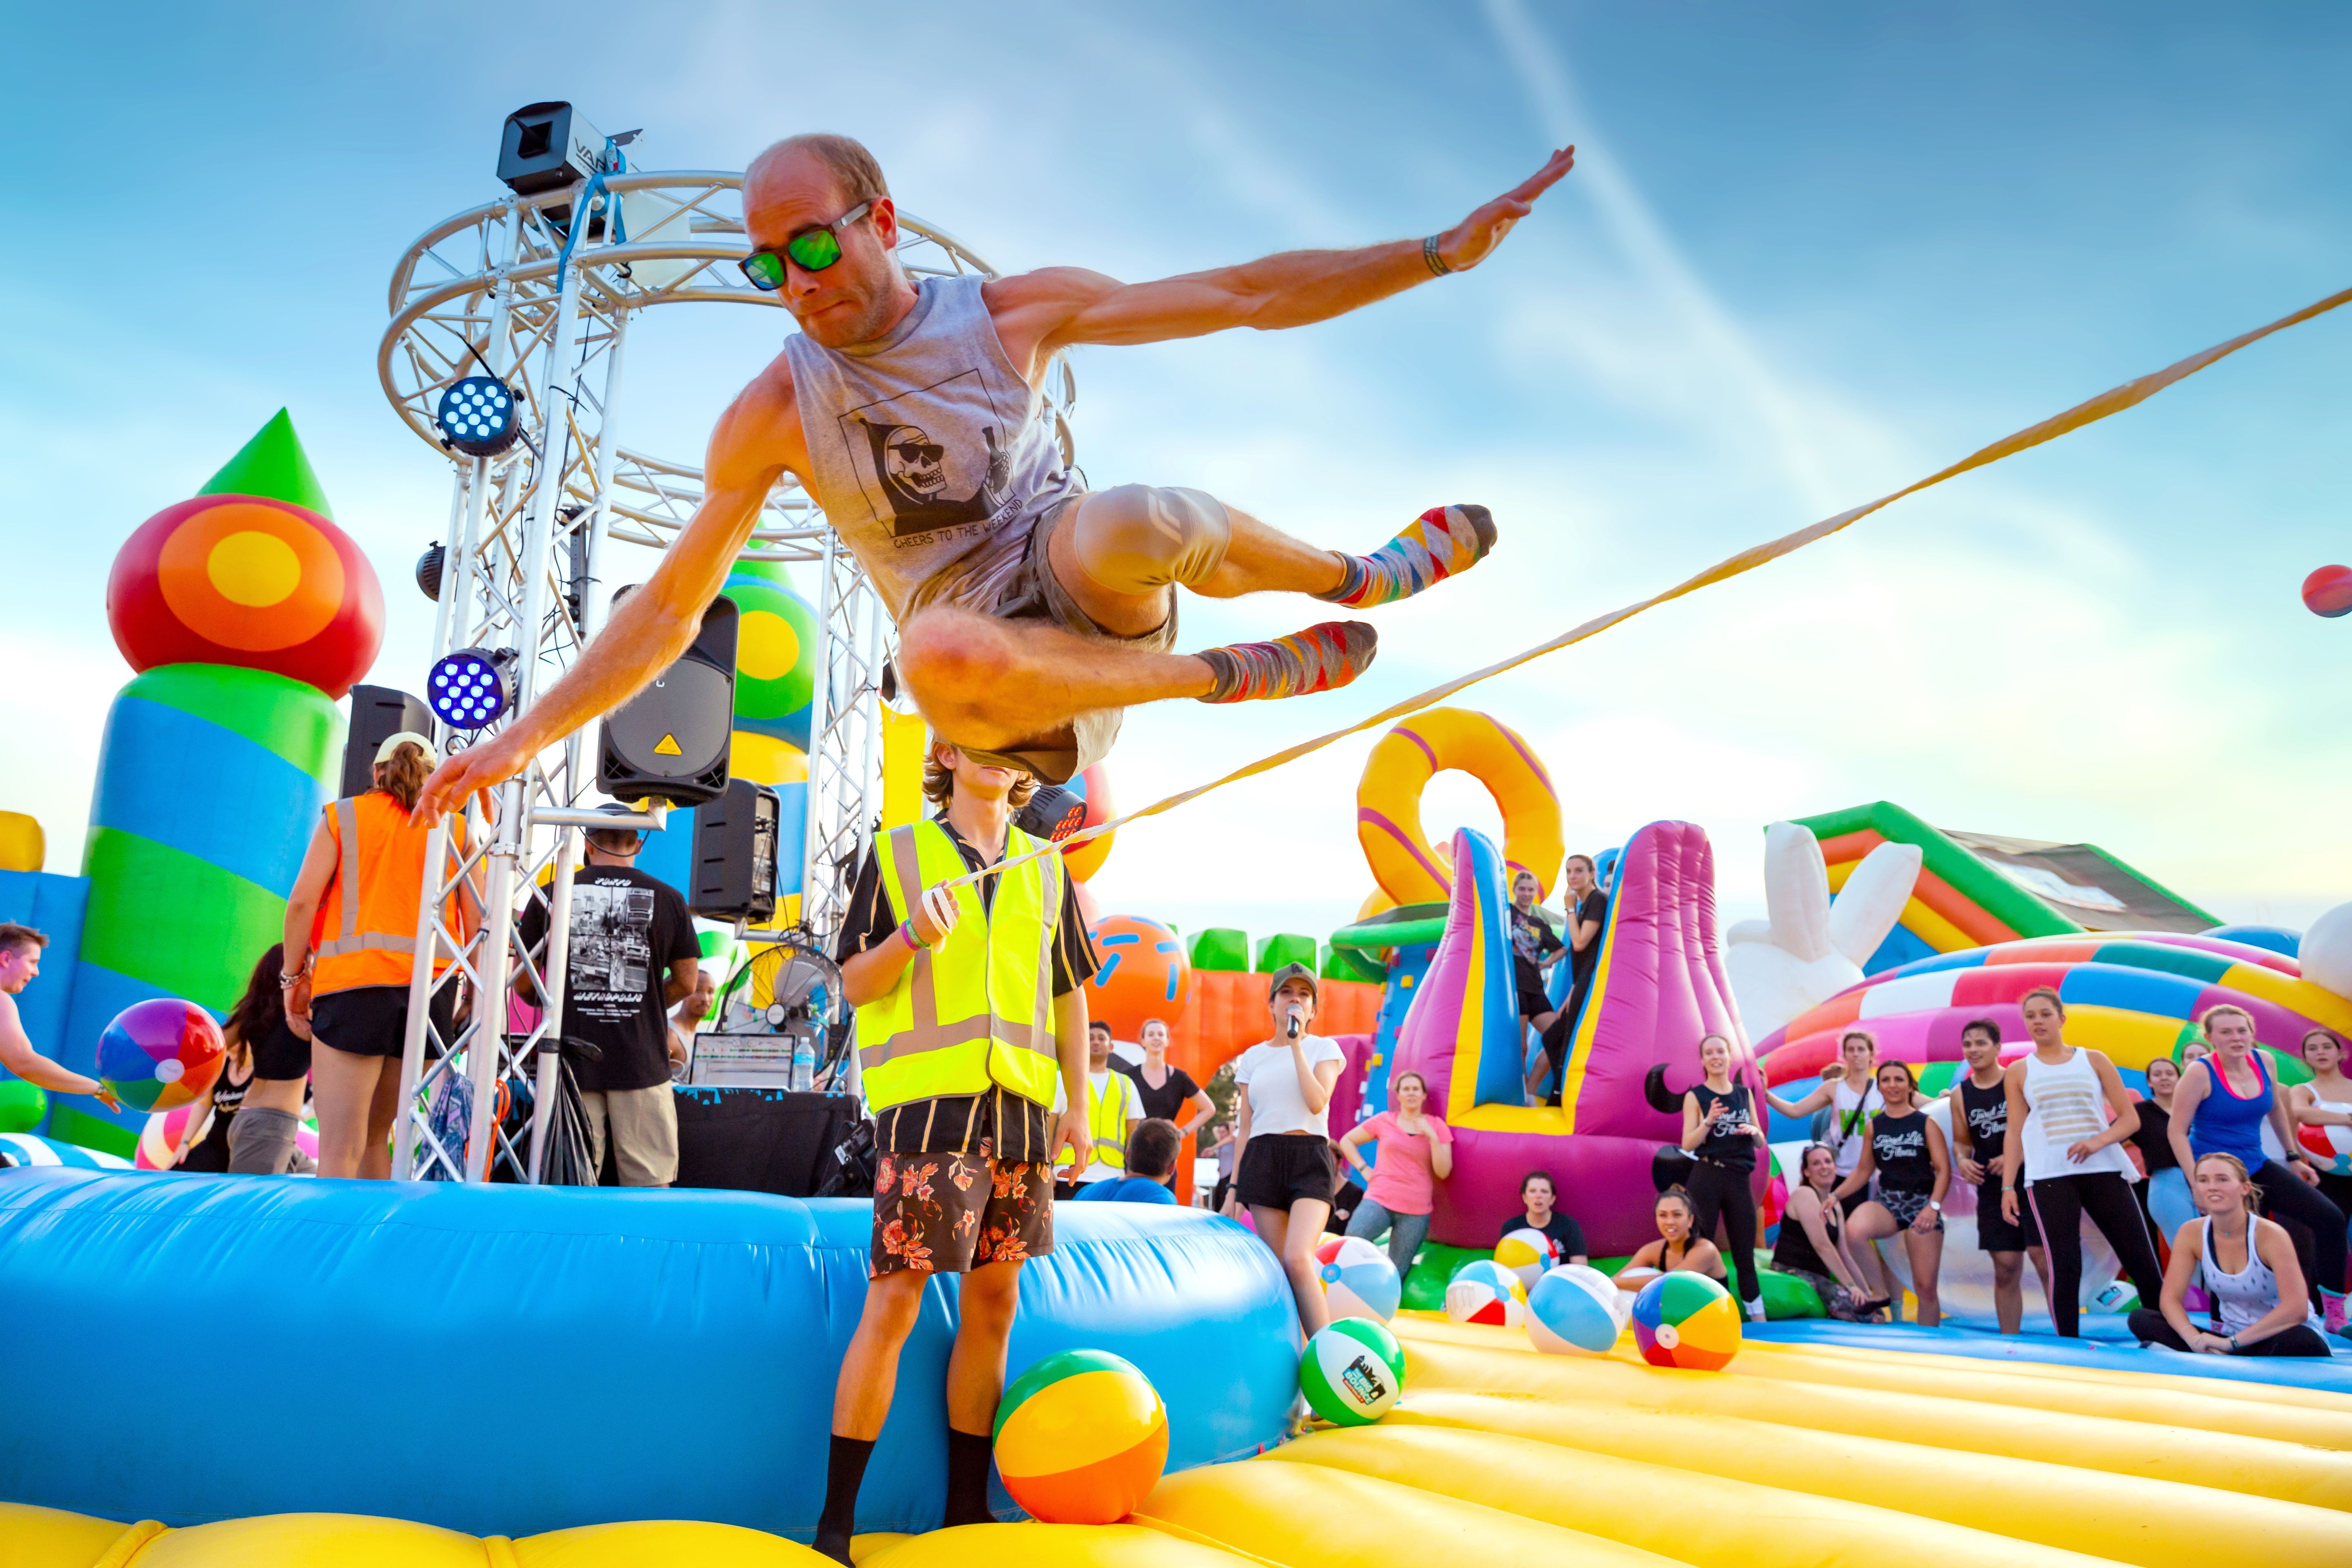 World's biggest bouncy castle to leap its way into town next March